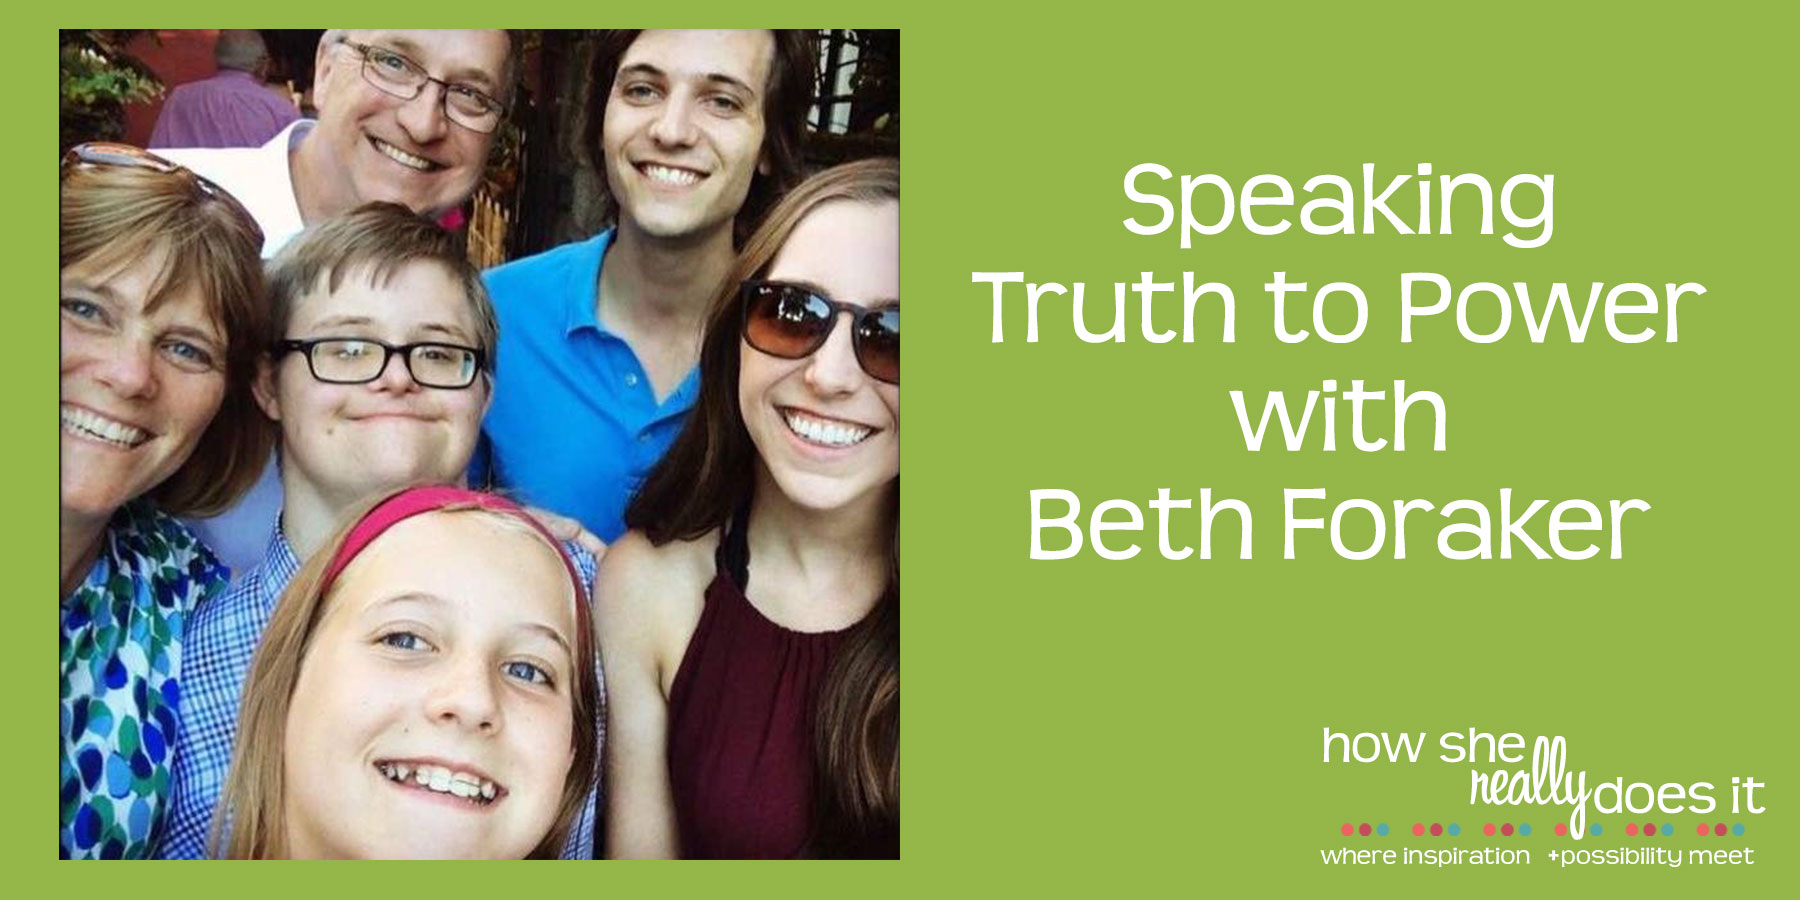 Speaking Truth to Power with Beth Foraker